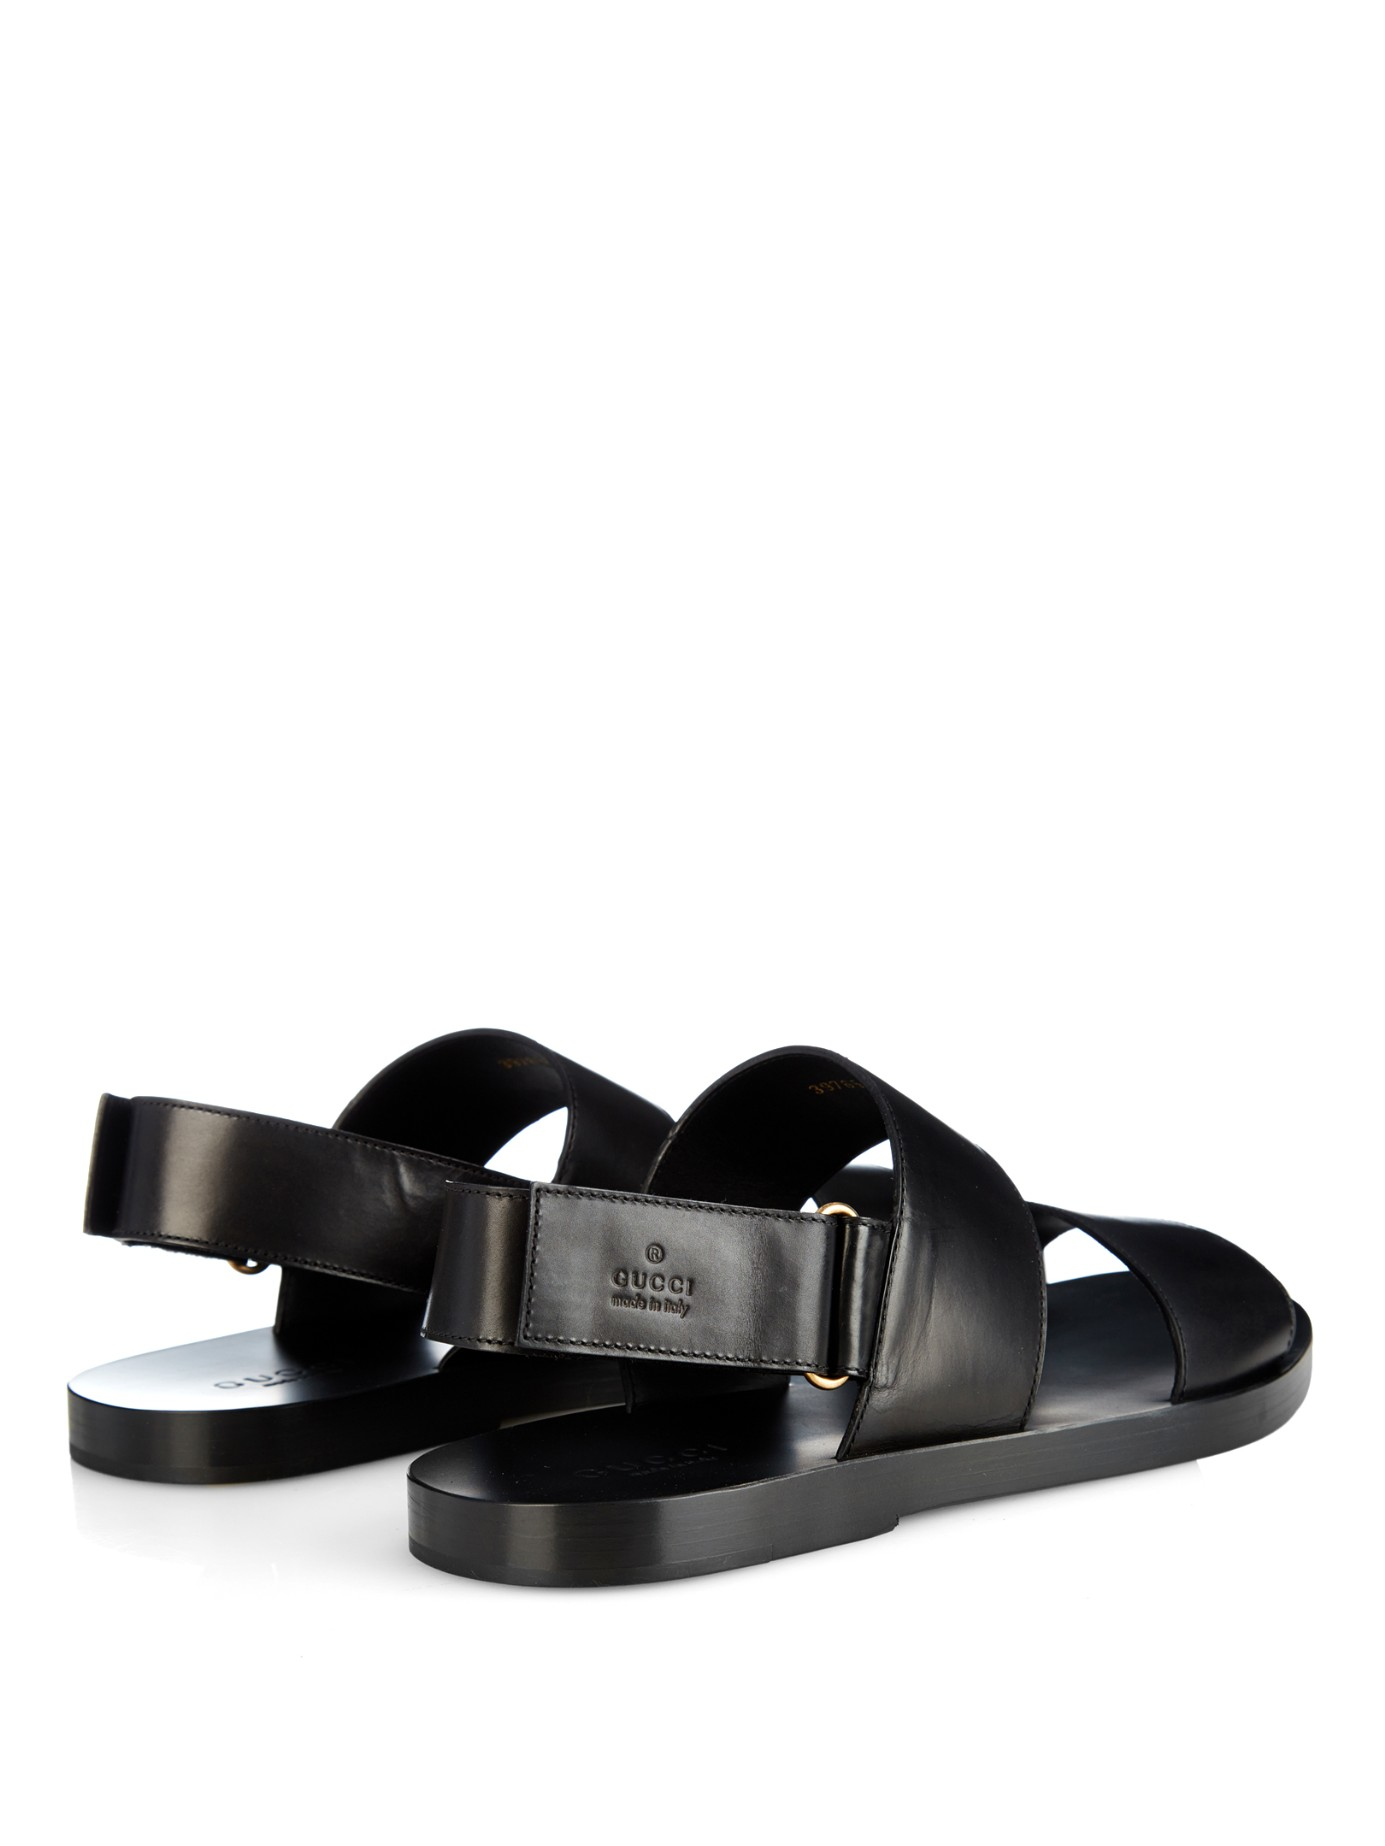 Lyst Gucci  Double Strap Leather Sandals  in Black for Men